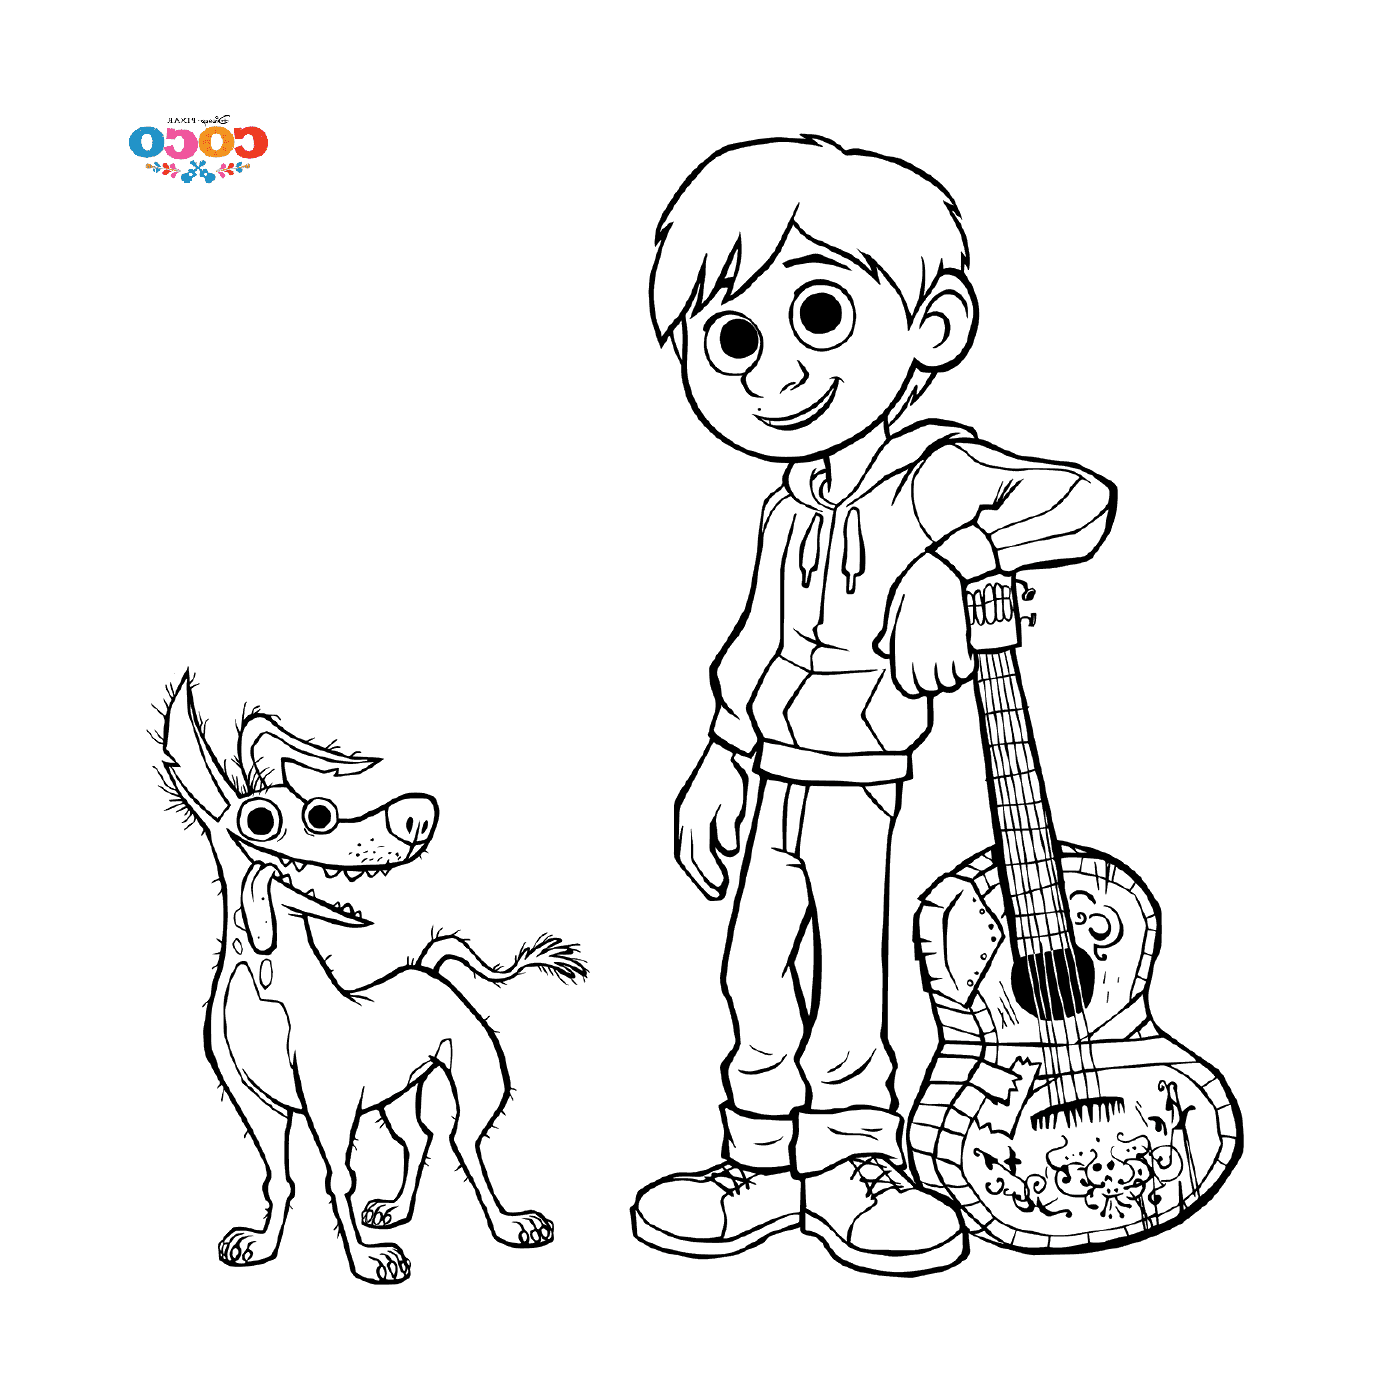  Miguel and Dante the Dog, in Disney Coco 